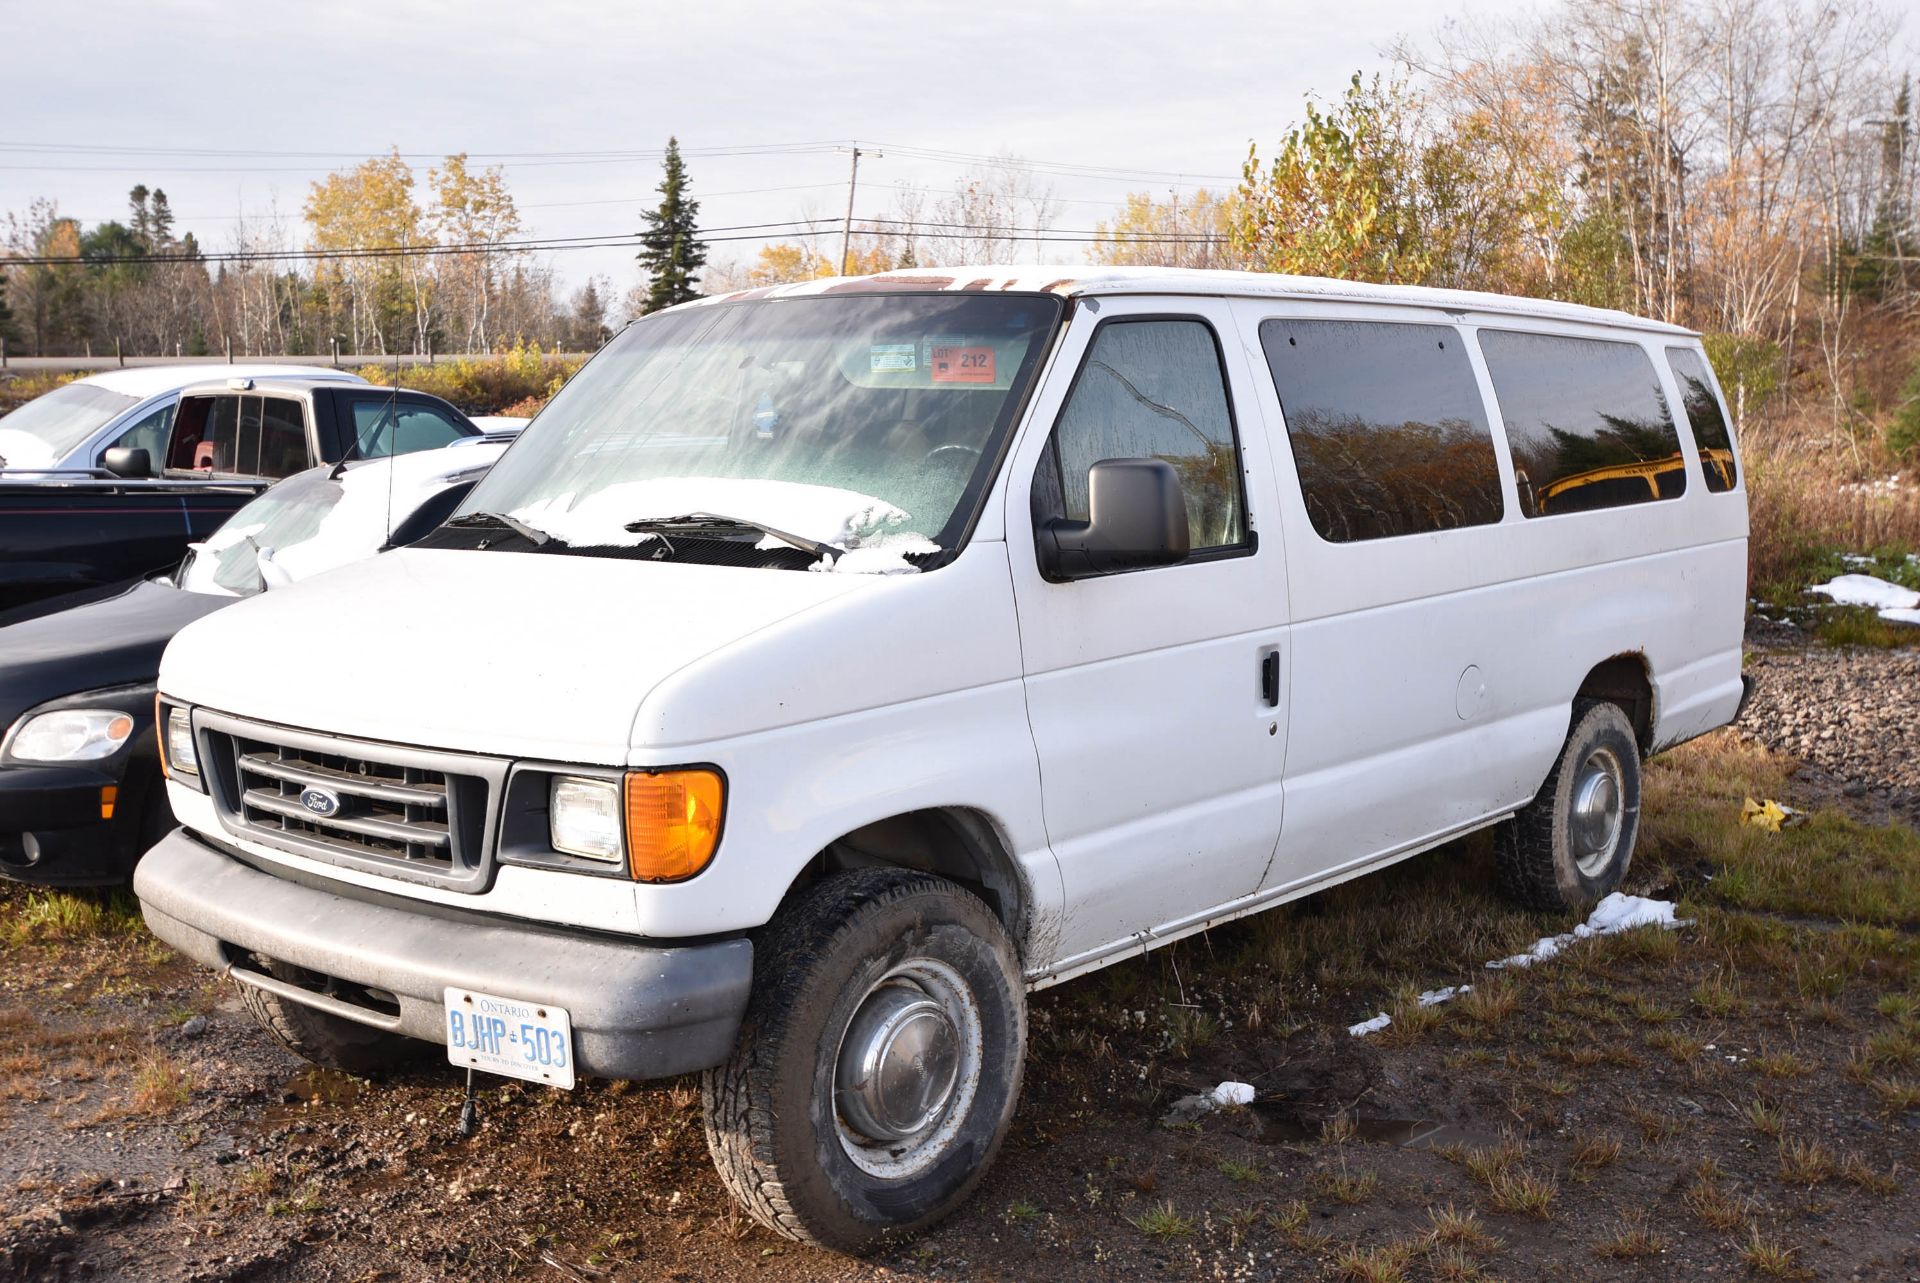 FORD (2006) E-350 PASSENGER VAN WITH 5.4 L V8 GAS ENGINE, AUTOMATIC TRANSMISSION, RWD, 402,043 KM (